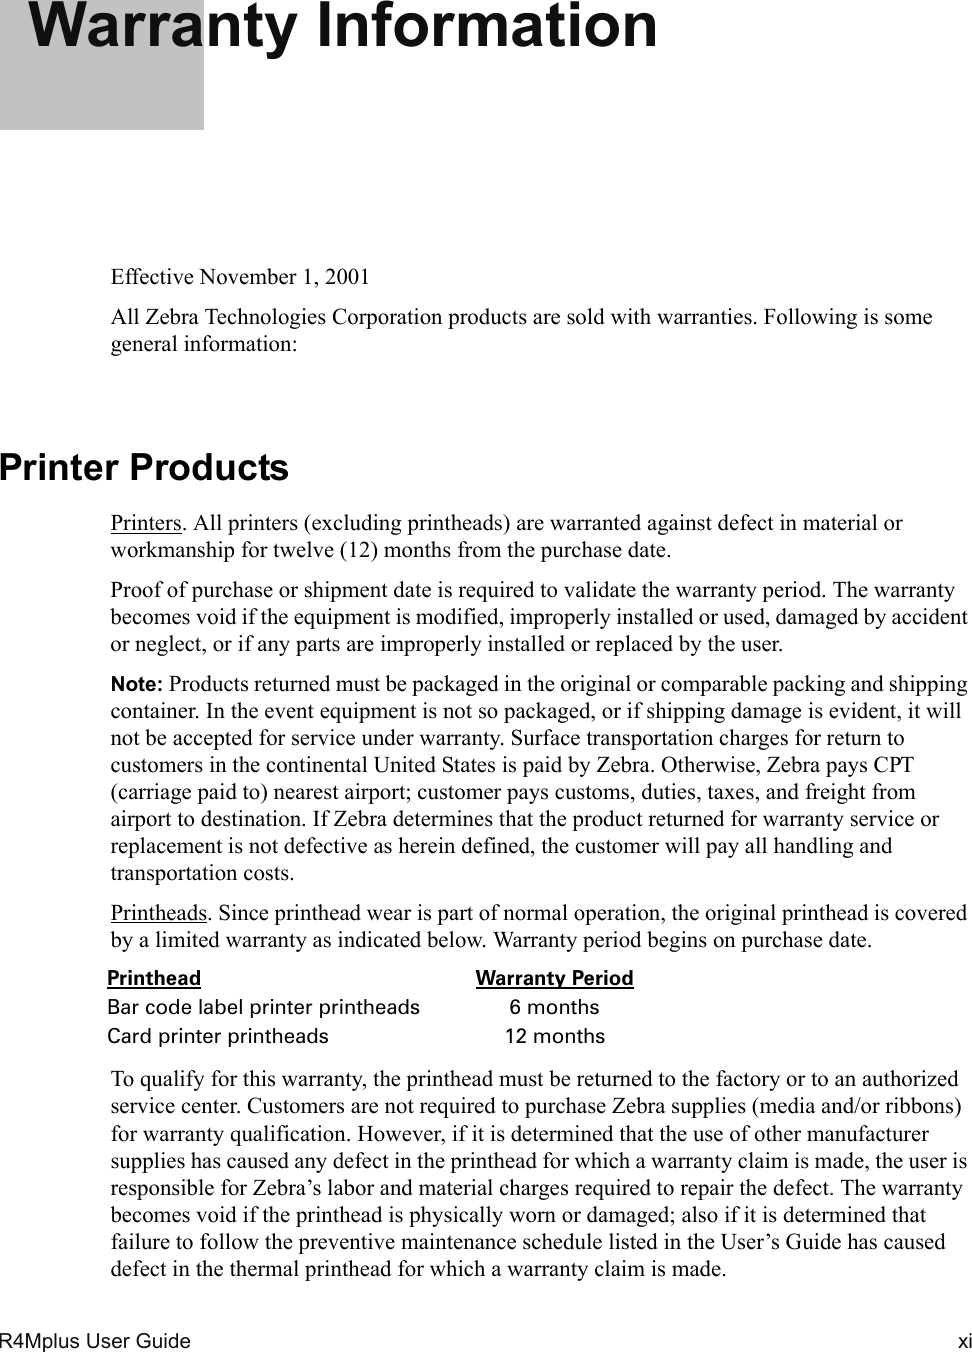 R4Mplus User Guide  xiWarranty InformationEffective November 1, 2001All Zebra Technologies Corporation products are sold with warranties. Following is some general information:Printer ProductsPrinters. All printers (excluding printheads) are warranted against defect in material or workmanship for twelve (12) months from the purchase date.Proof of purchase or shipment date is required to validate the warranty period. The warranty becomes void if the equipment is modified, improperly installed or used, damaged by accident or neglect, or if any parts are improperly installed or replaced by the user.Note: Products returned must be packaged in the original or comparable packing and shipping container. In the event equipment is not so packaged, or if shipping damage is evident, it will not be accepted for service under warranty. Surface transportation charges for return to customers in the continental United States is paid by Zebra. Otherwise, Zebra pays CPT (carriage paid to) nearest airport; customer pays customs, duties, taxes, and freight from airport to destination. If Zebra determines that the product returned for warranty service or replacement is not defective as herein defined, the customer will pay all handling and transportation costs.Printheads. Since printhead wear is part of normal operation, the original printhead is covered by a limited warranty as indicated below. Warranty period begins on purchase date.To qualify for this warranty, the printhead must be returned to the factory or to an authorized service center. Customers are not required to purchase Zebra supplies (media and/or ribbons) for warranty qualification. However, if it is determined that the use of other manufacturer supplies has caused any defect in the printhead for which a warranty claim is made, the user is responsible for Zebra’s labor and material charges required to repair the defect. The warranty becomes void if the printhead is physically worn or damaged; also if it is determined that failure to follow the preventive maintenance schedule listed in the User’s Guide has caused defect in the thermal printhead for which a warranty claim is made.Printhead Warranty PeriodBar code label printer printheads 6 monthsCard printer printheads 12 months